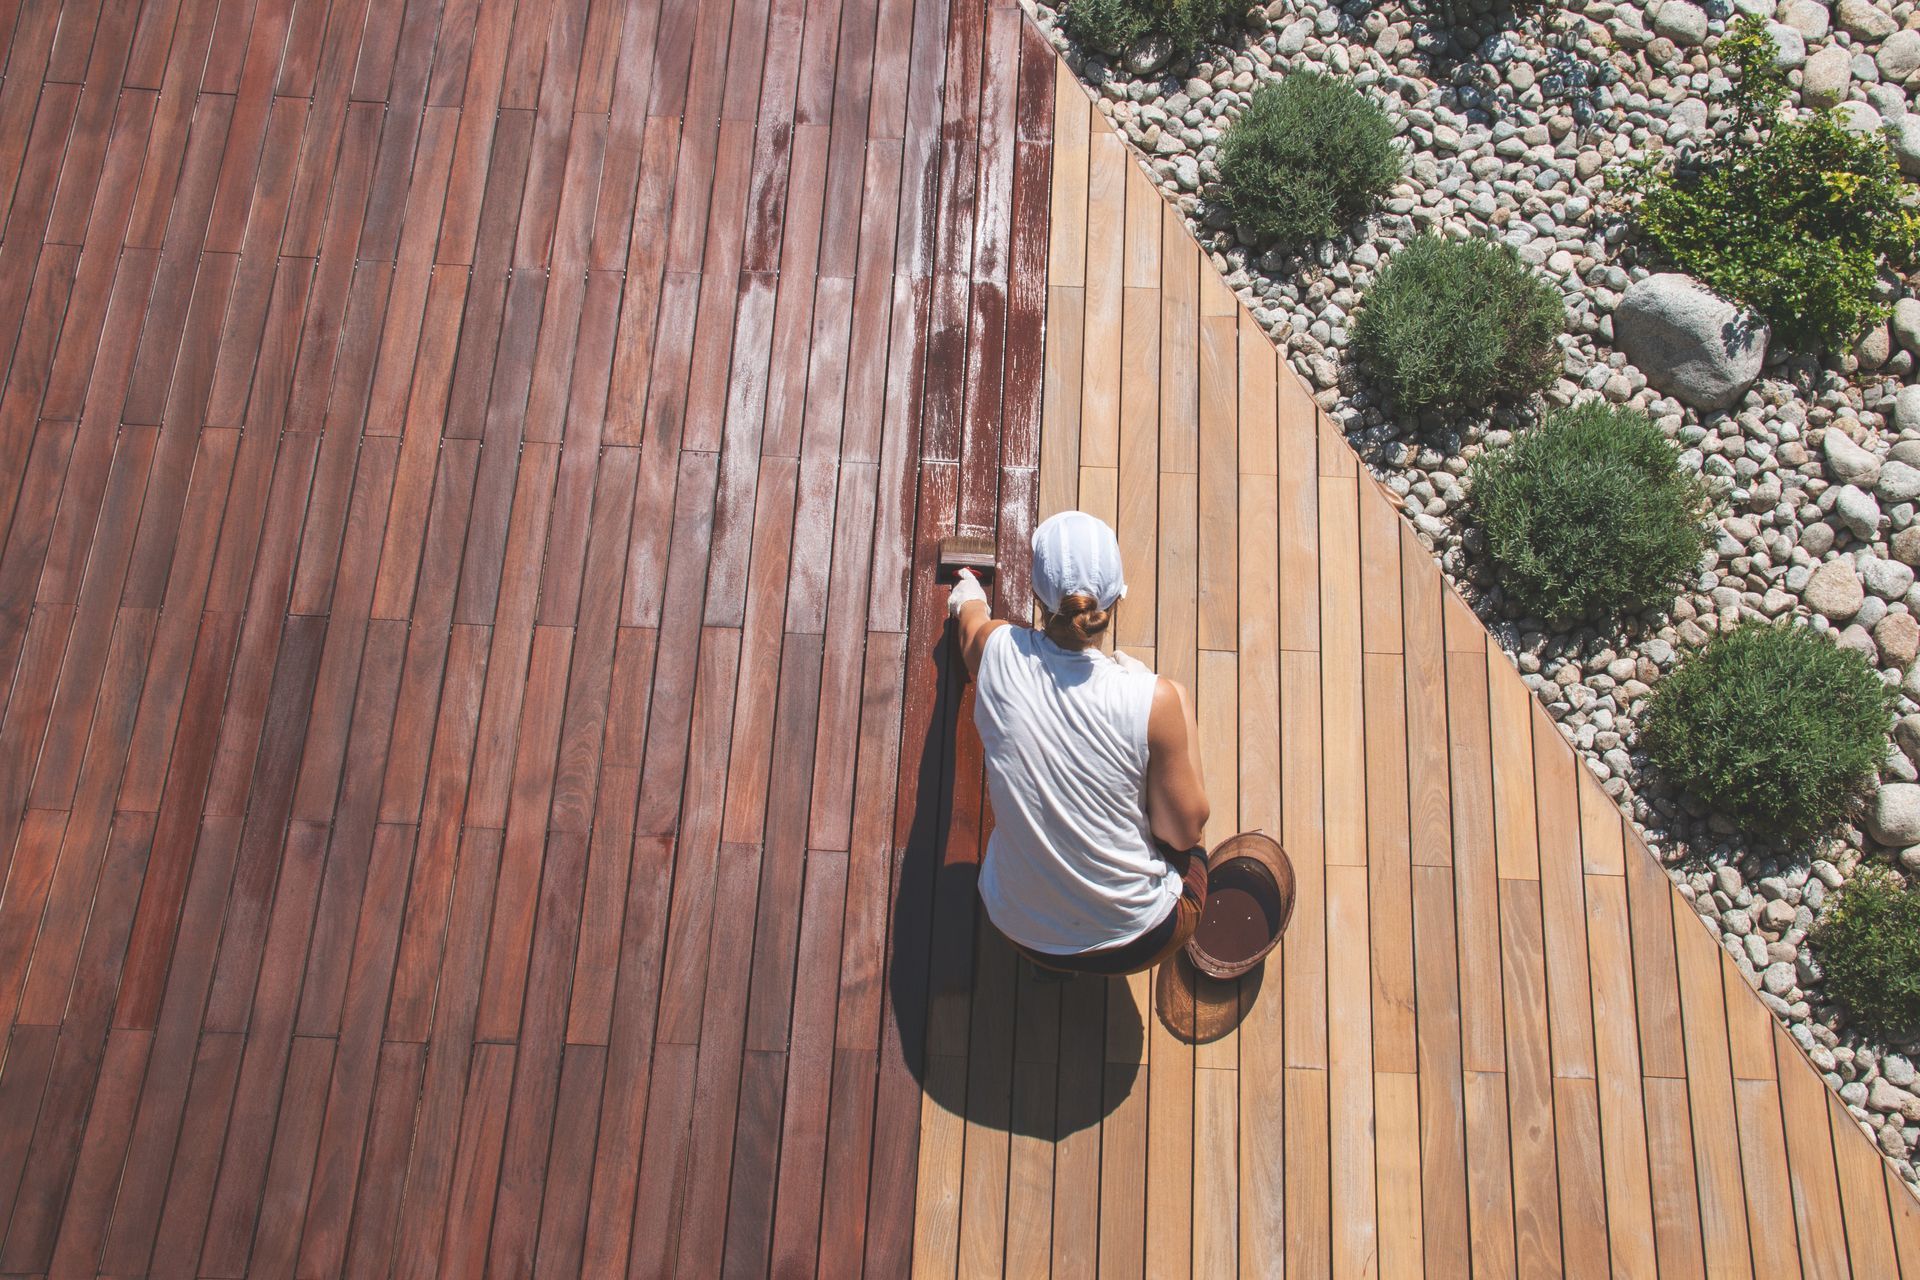 Overhead view of a person meticulously applying protective wood stain with a brush during the renovation treatment of a wood deck.